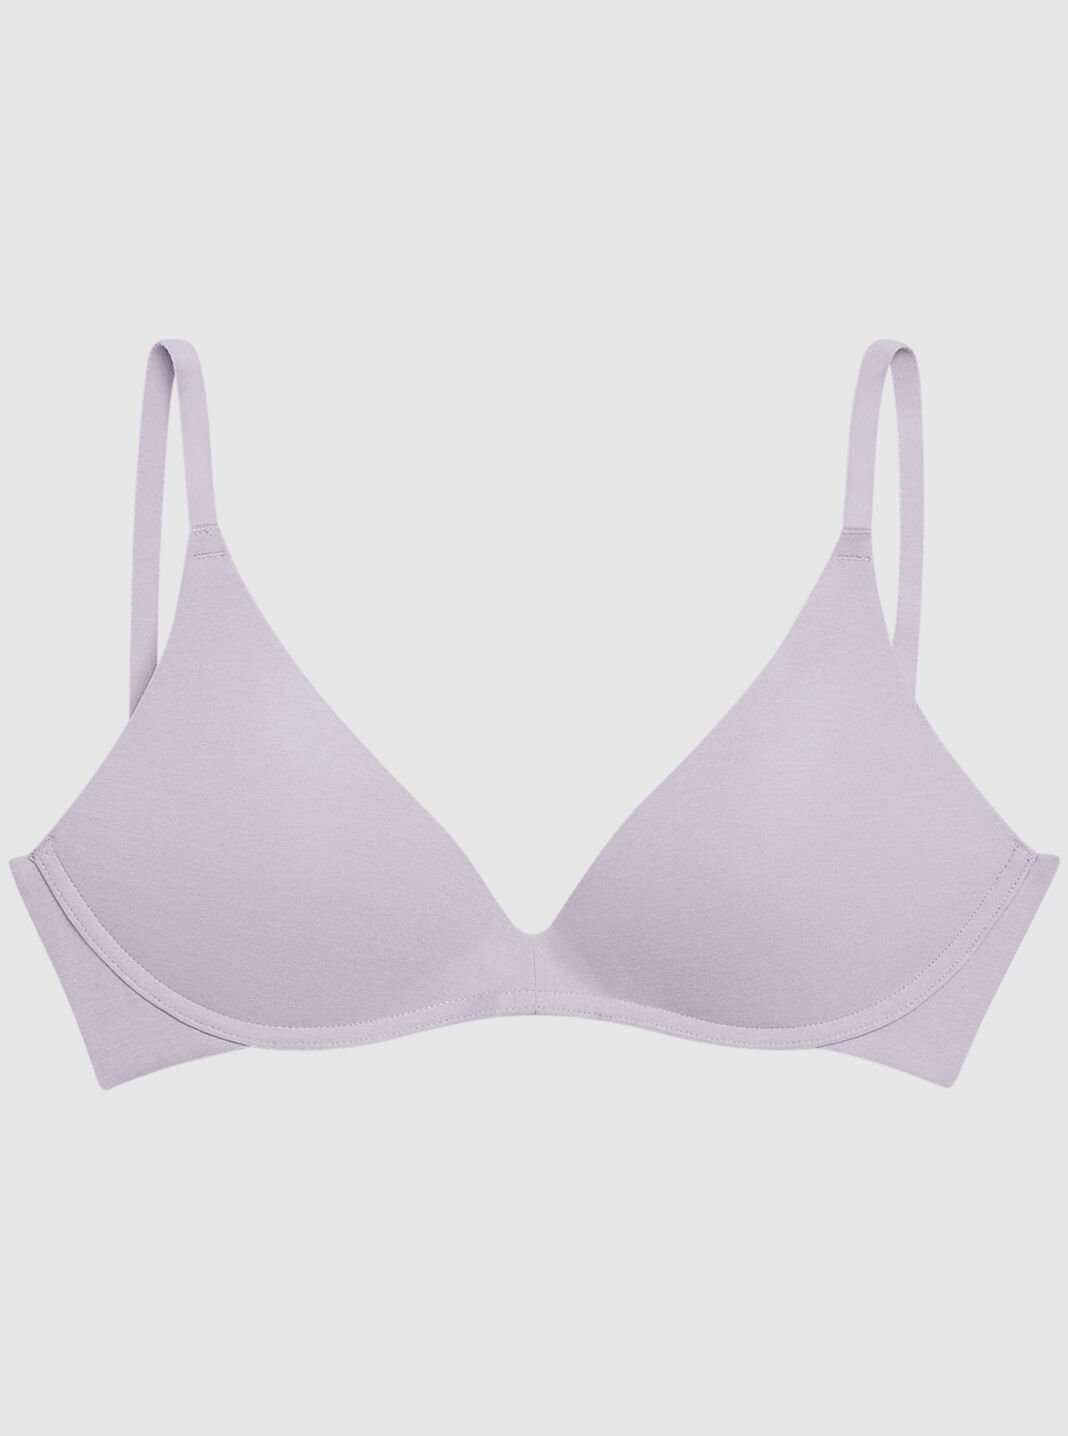 La Senza - Lebanon - Fall in LOVE with the NEW WIRELESS BRA!! A super soft  body and wireless cups, you'll feel sexy and comfy all day. Try them  in-stores & share